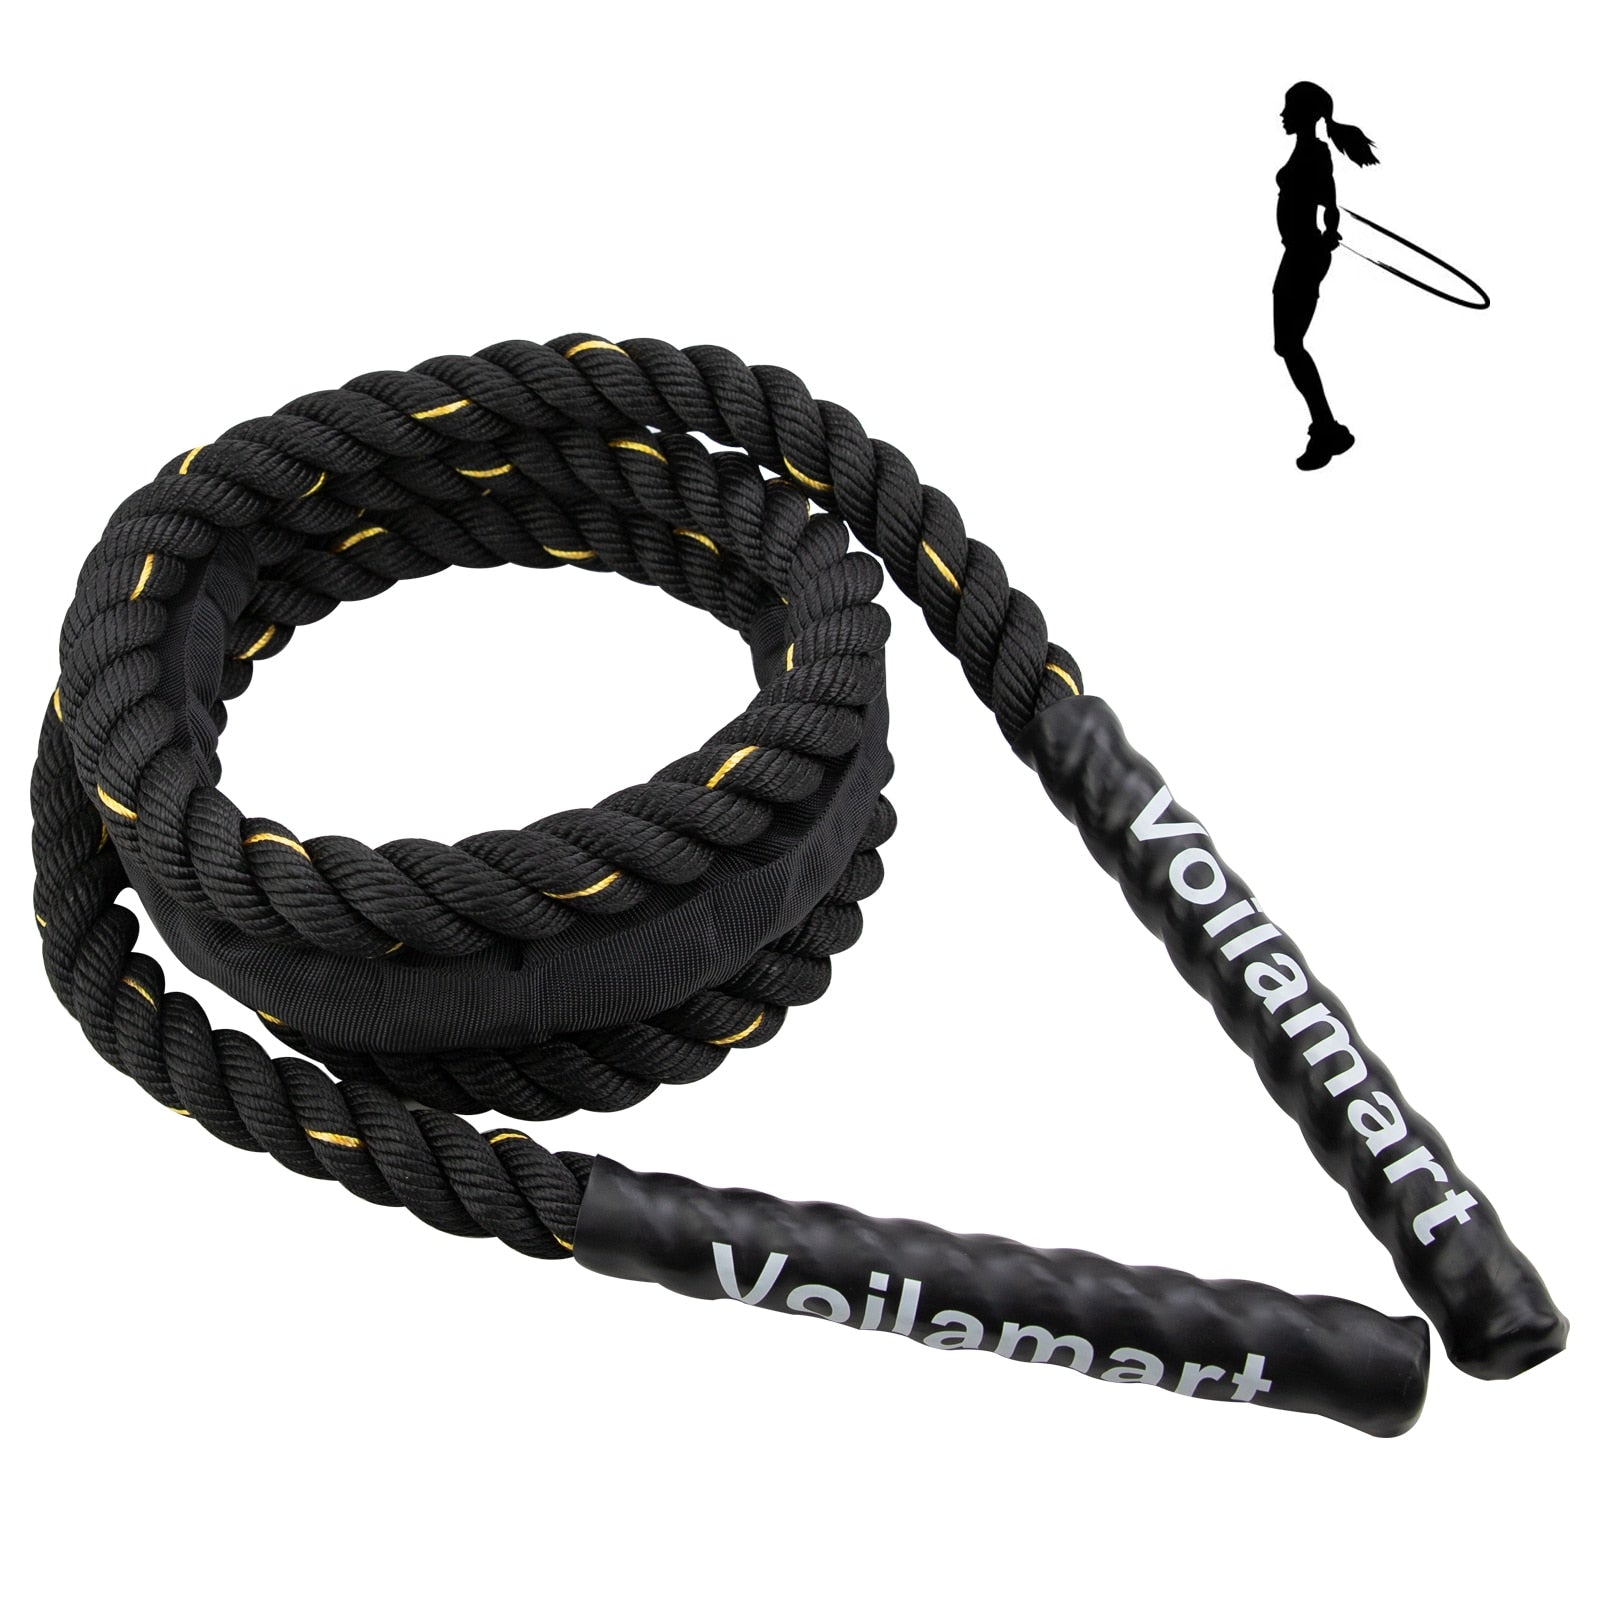 3LB-5LB/10FT Heavy Jump Rope Crossfit Weighted Battle Skipping Ropes Power Improve Strenght Training Fitness Home Gym - adamshealthstore